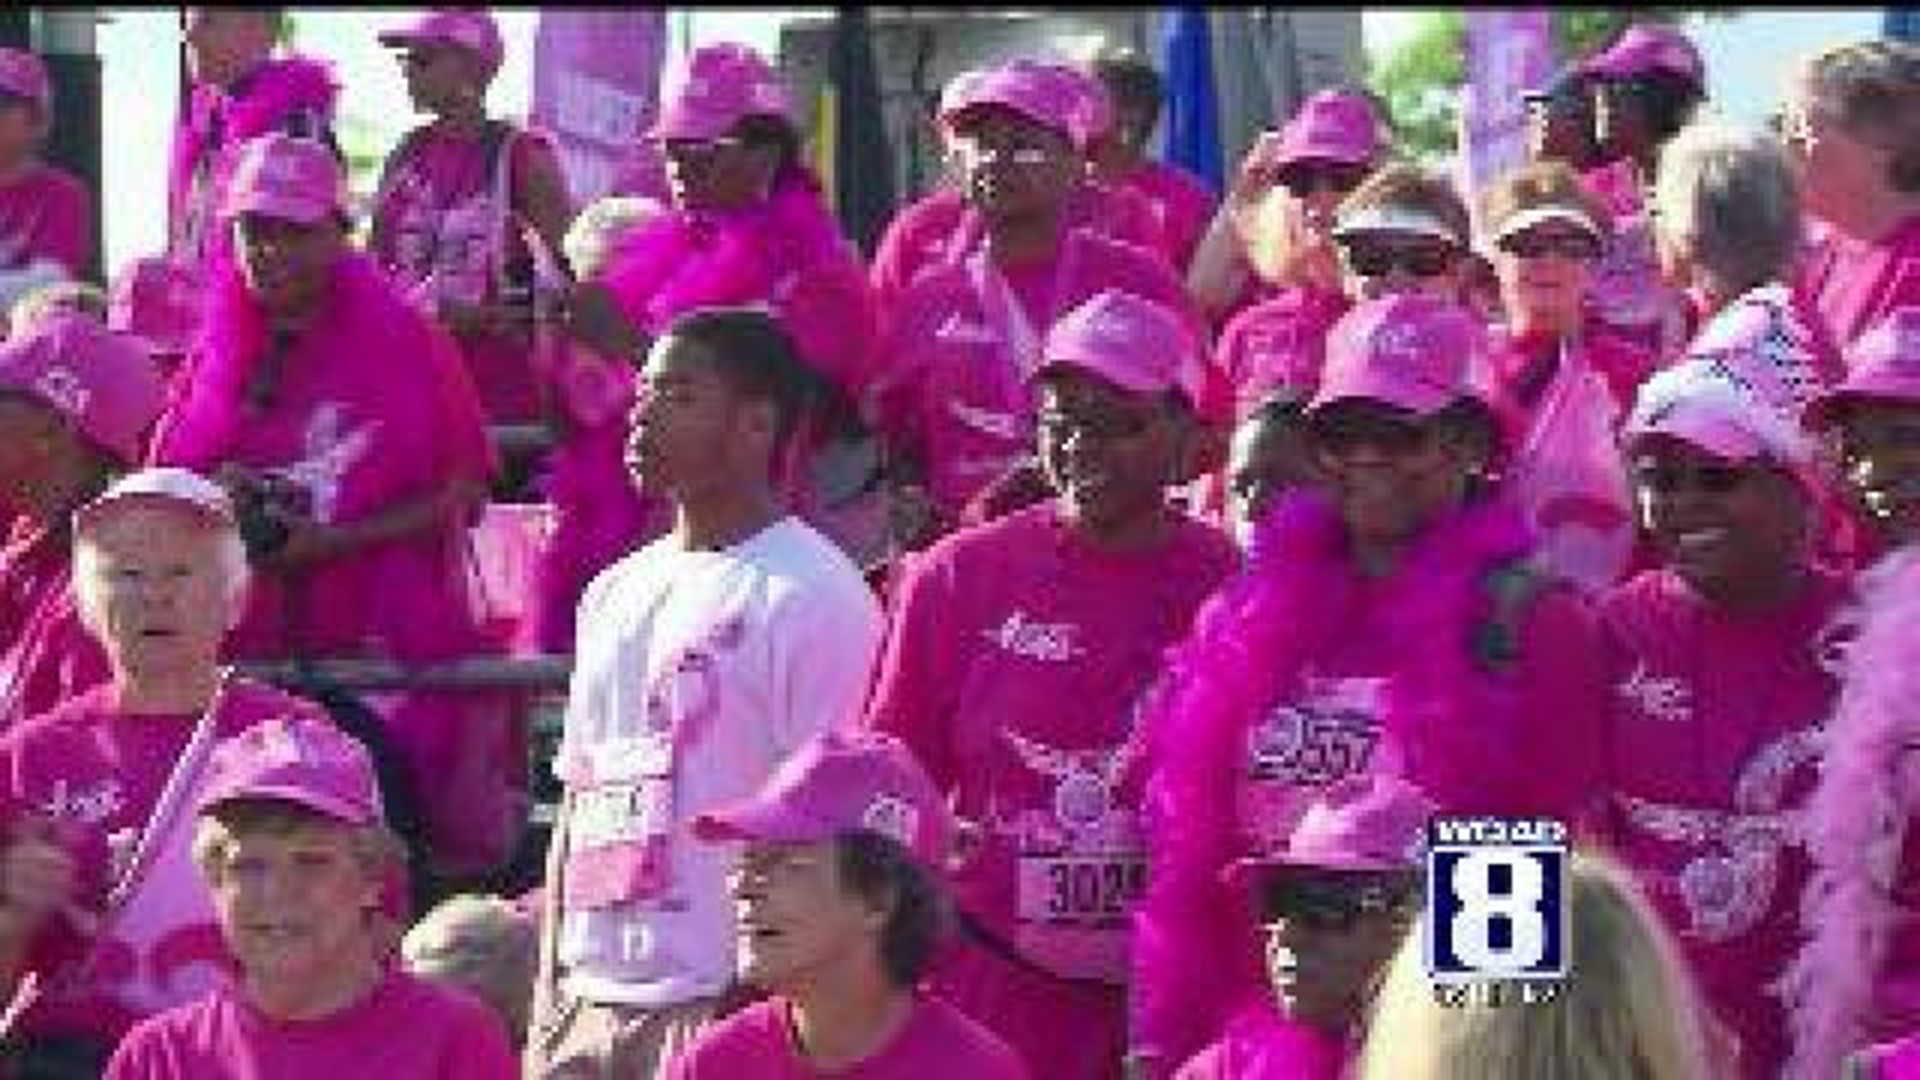 Some Susan G. Komen races cancelled in 2014